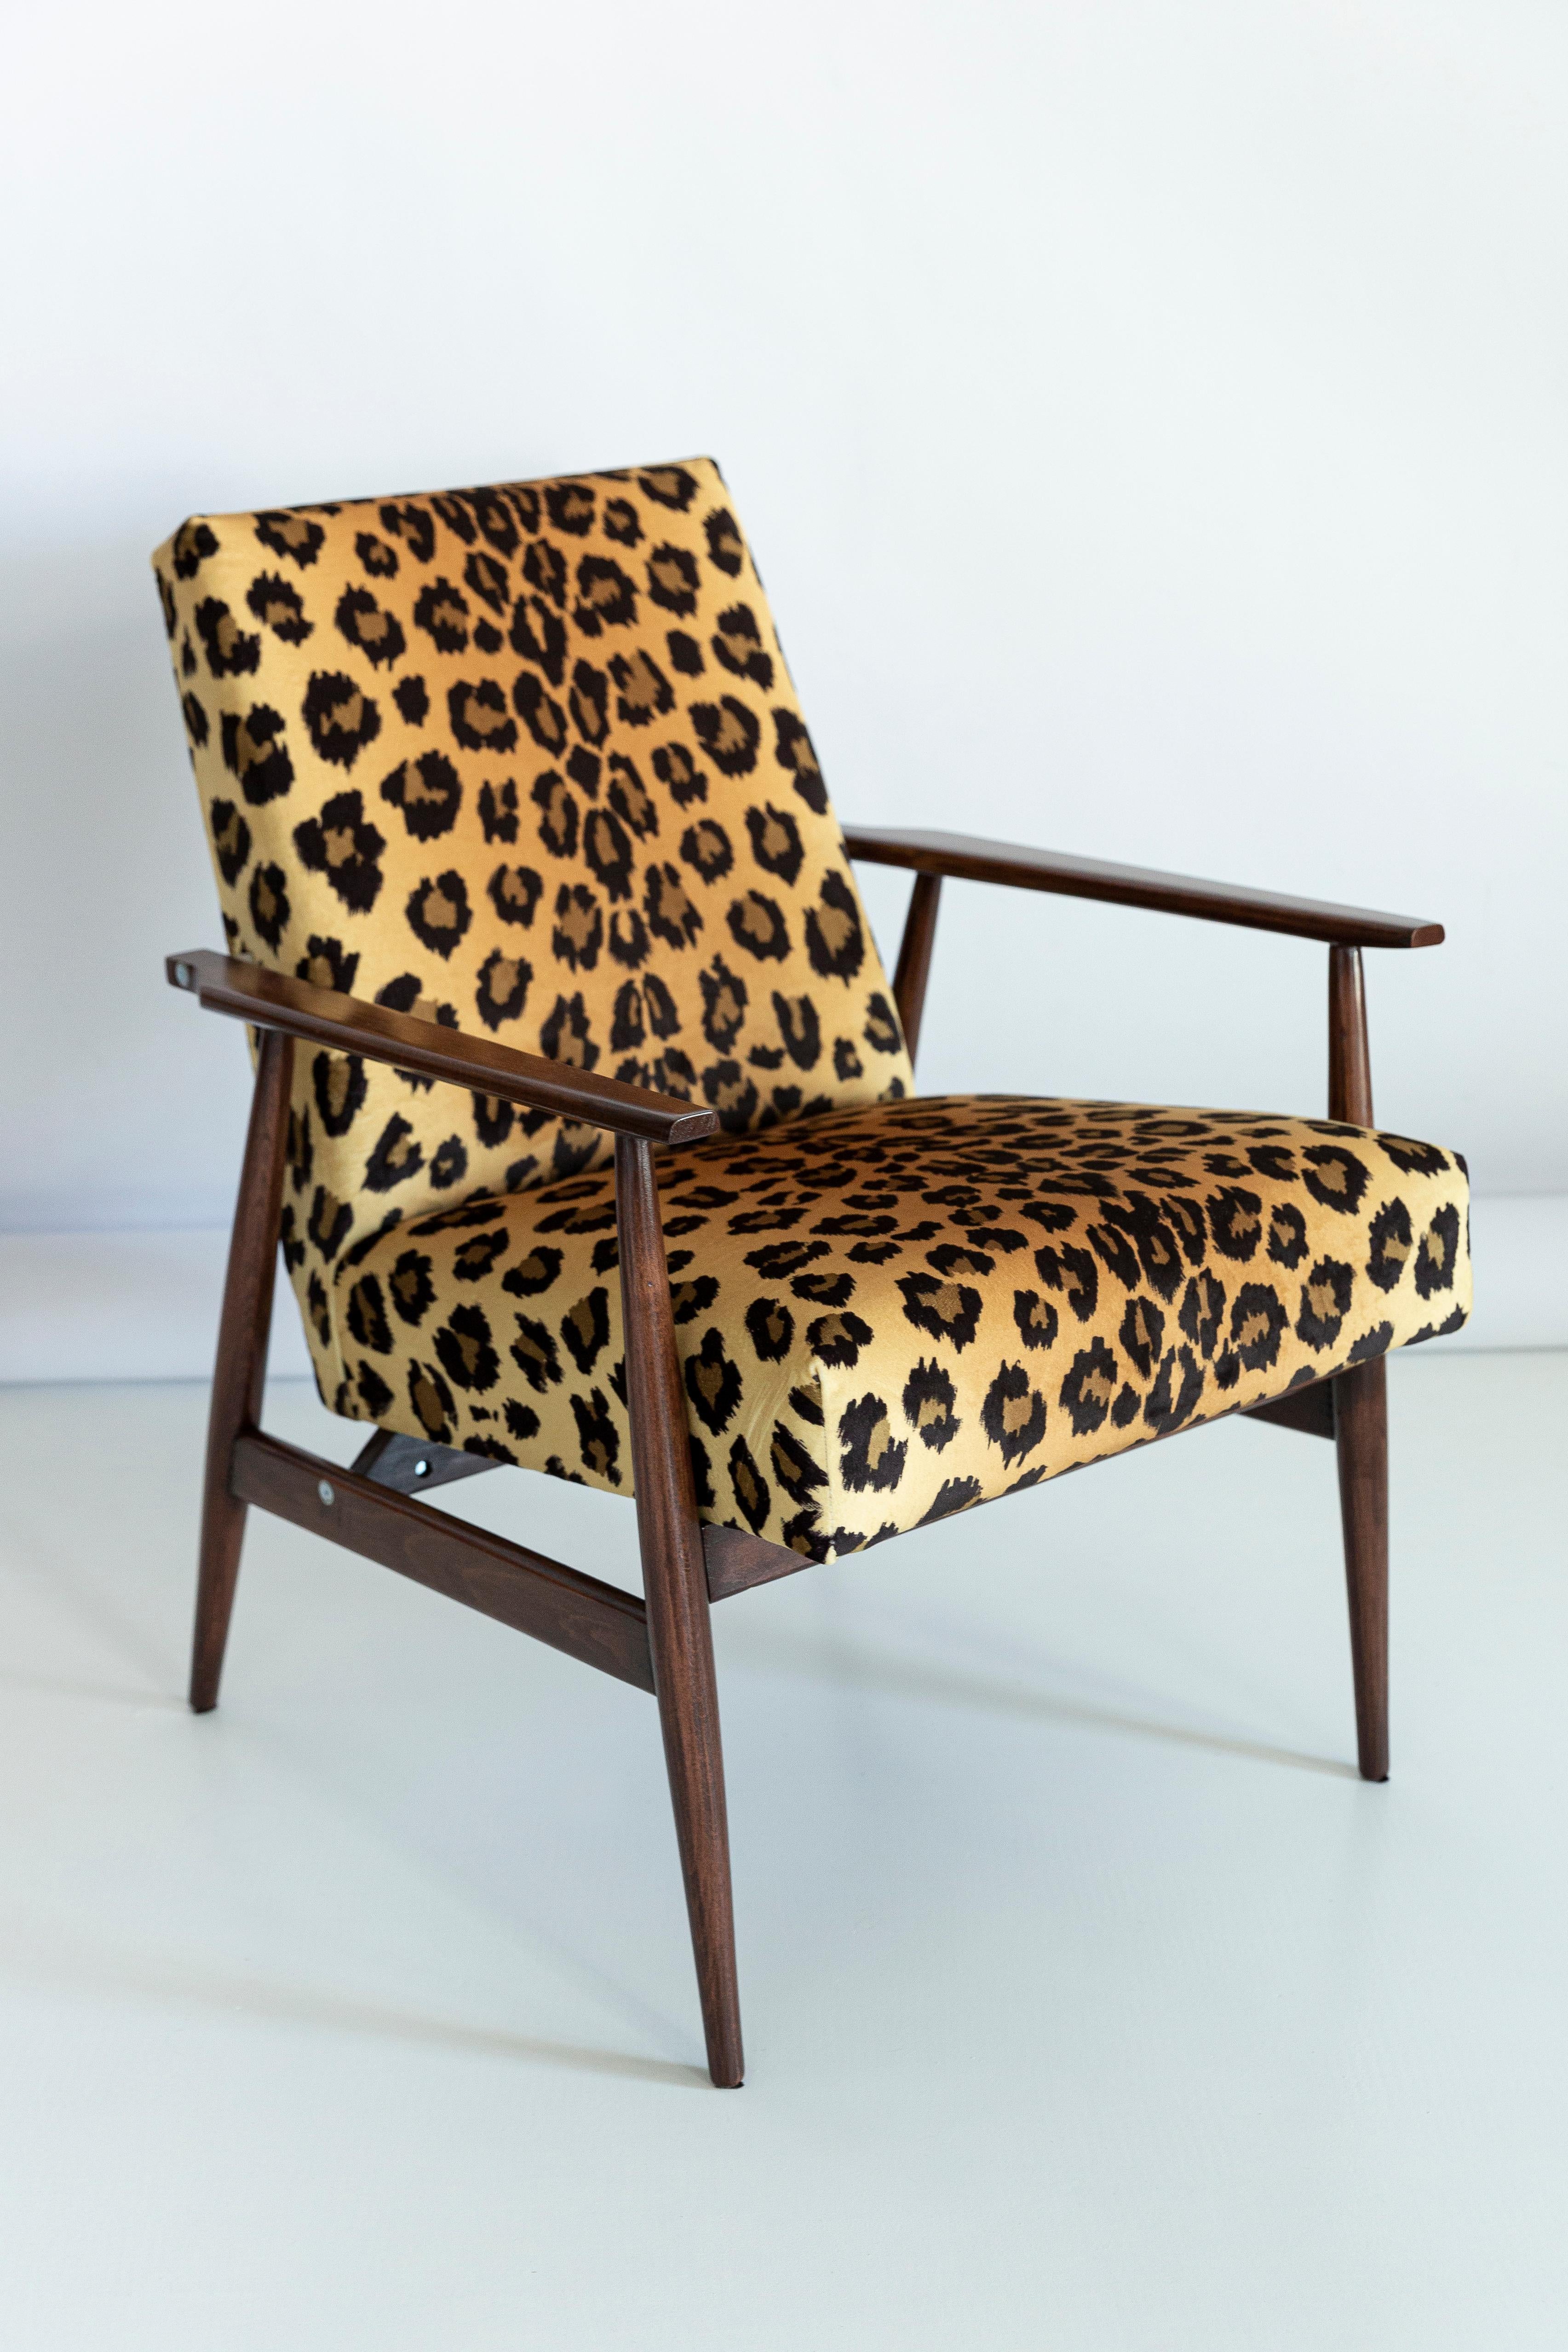 Set of eight beautiful, restored armchairs designed by Henryk Lis. Furniture after full carpentry and upholstery renovation. The fabric, which is covered with a backrest and a seat, is a high-quality Italian velvet upholstery printed in leopard